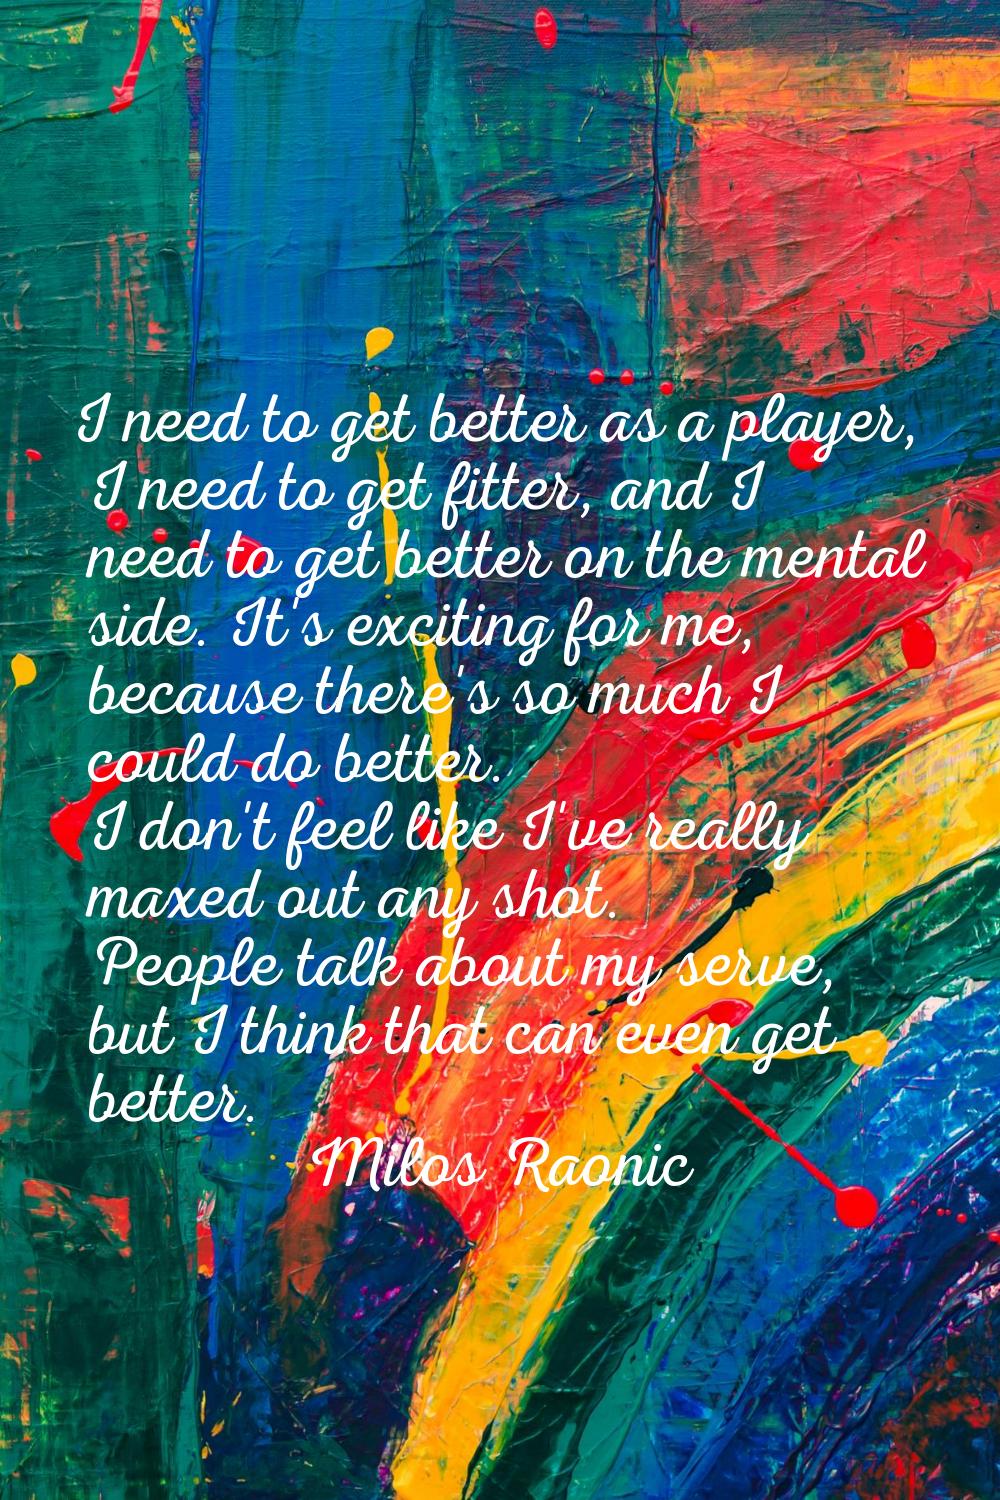 I need to get better as a player, I need to get fitter, and I need to get better on the mental side